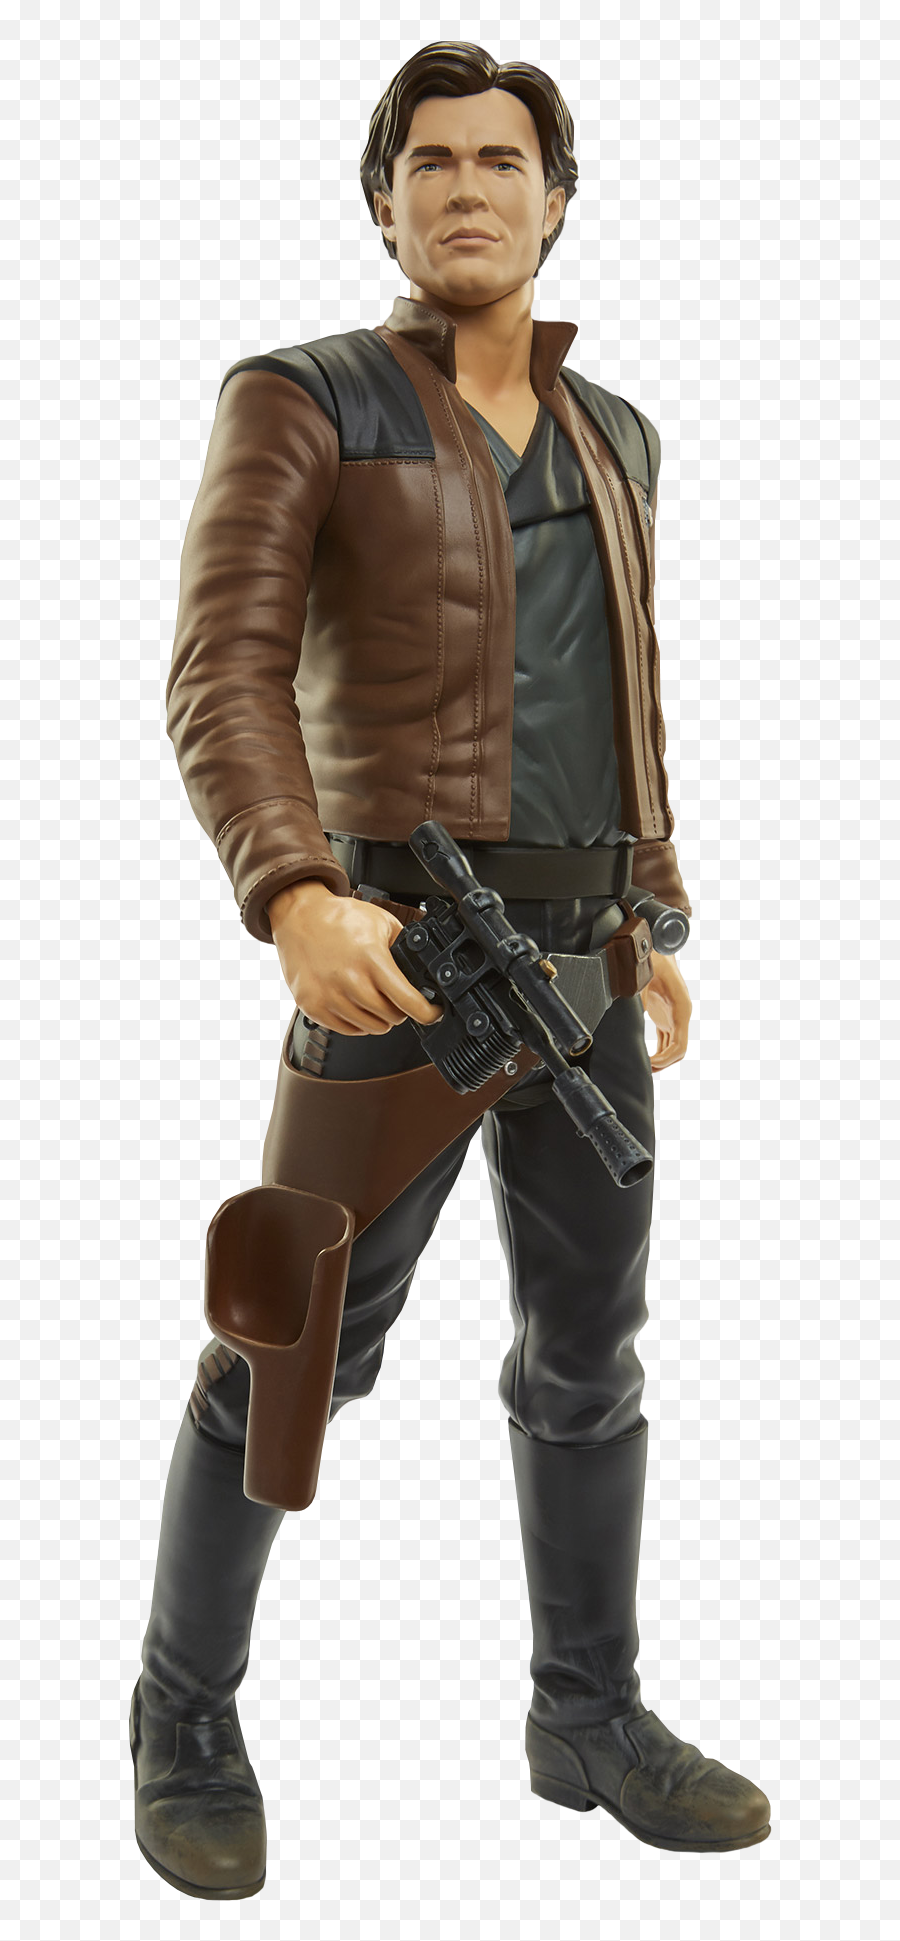 Han Solo Png - Solo A Star Wars Story Force Link Millennium Falcon Vehicle,Han Solo Png